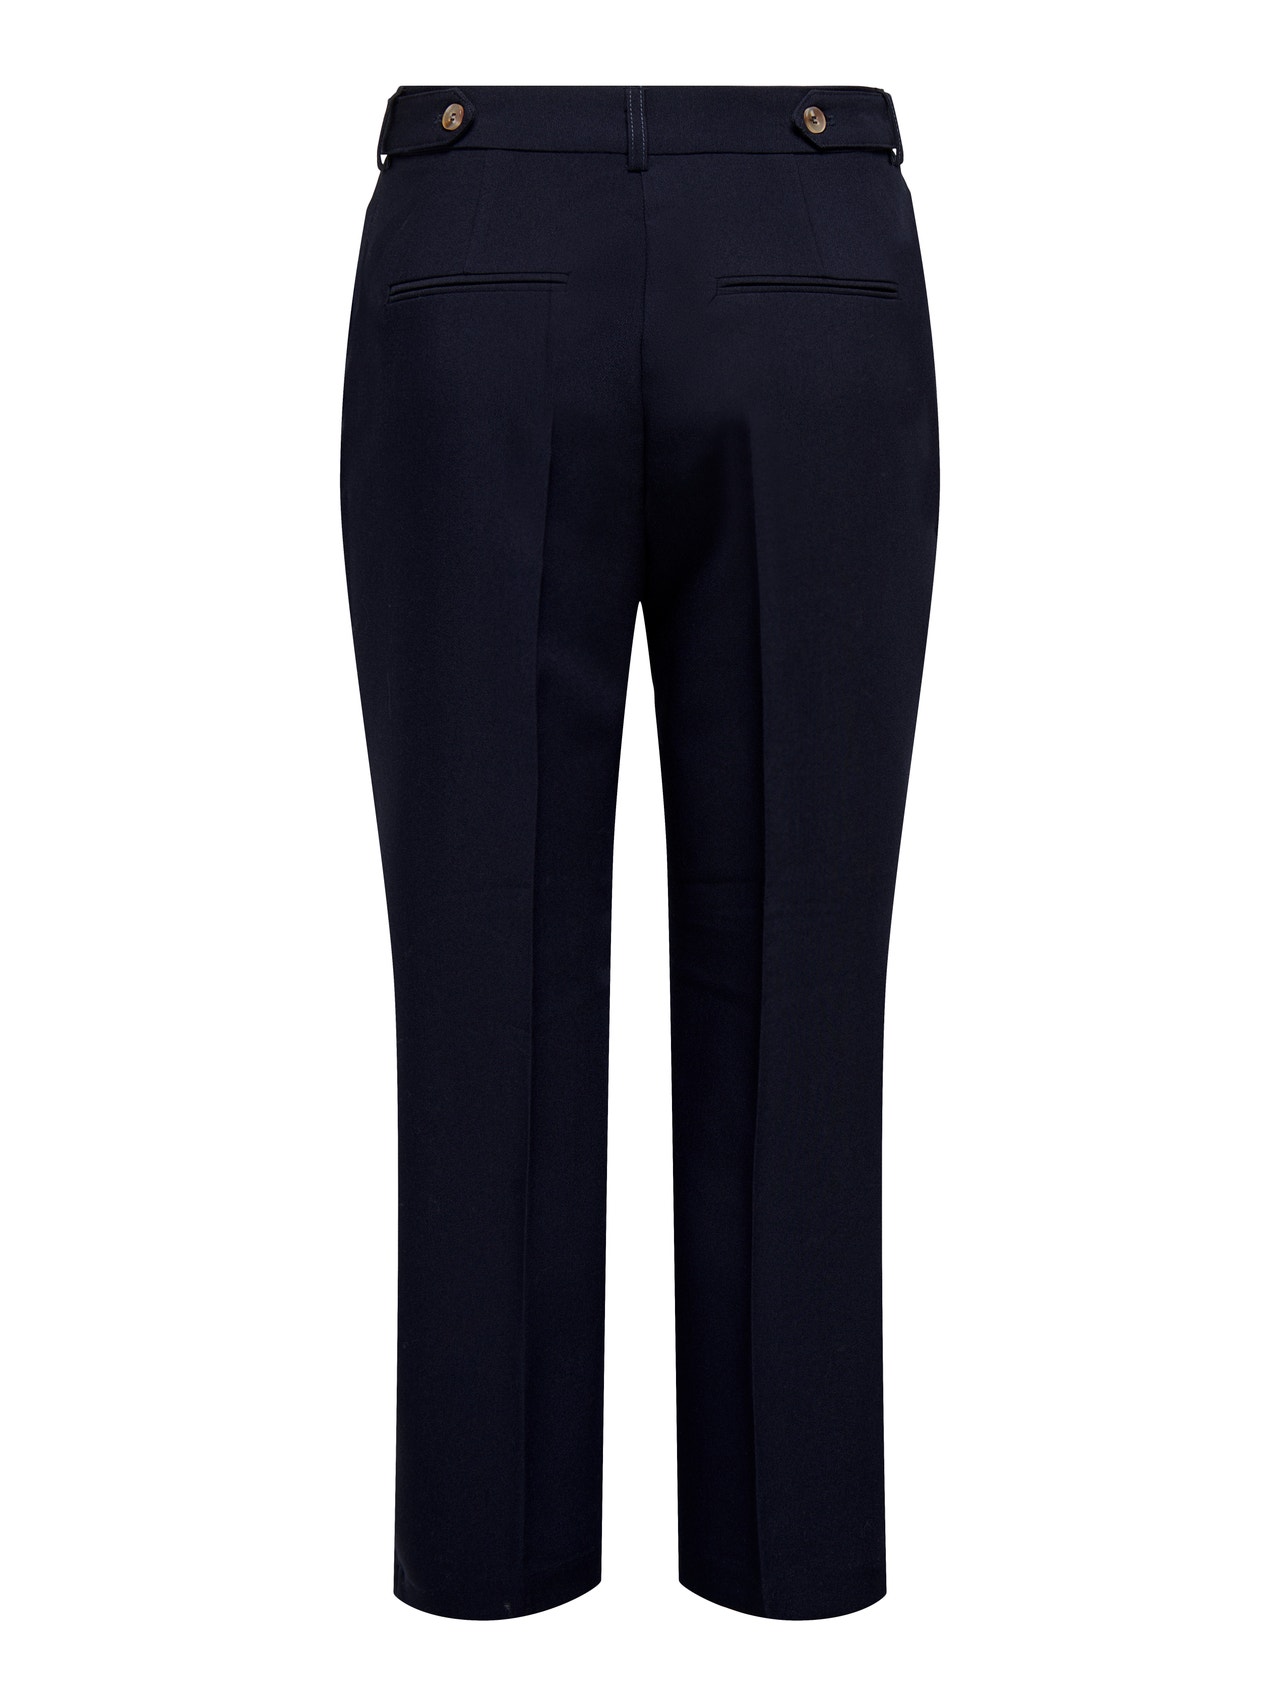 ONLY High Waisted Cigarette Pants -Night Sky - 15279149